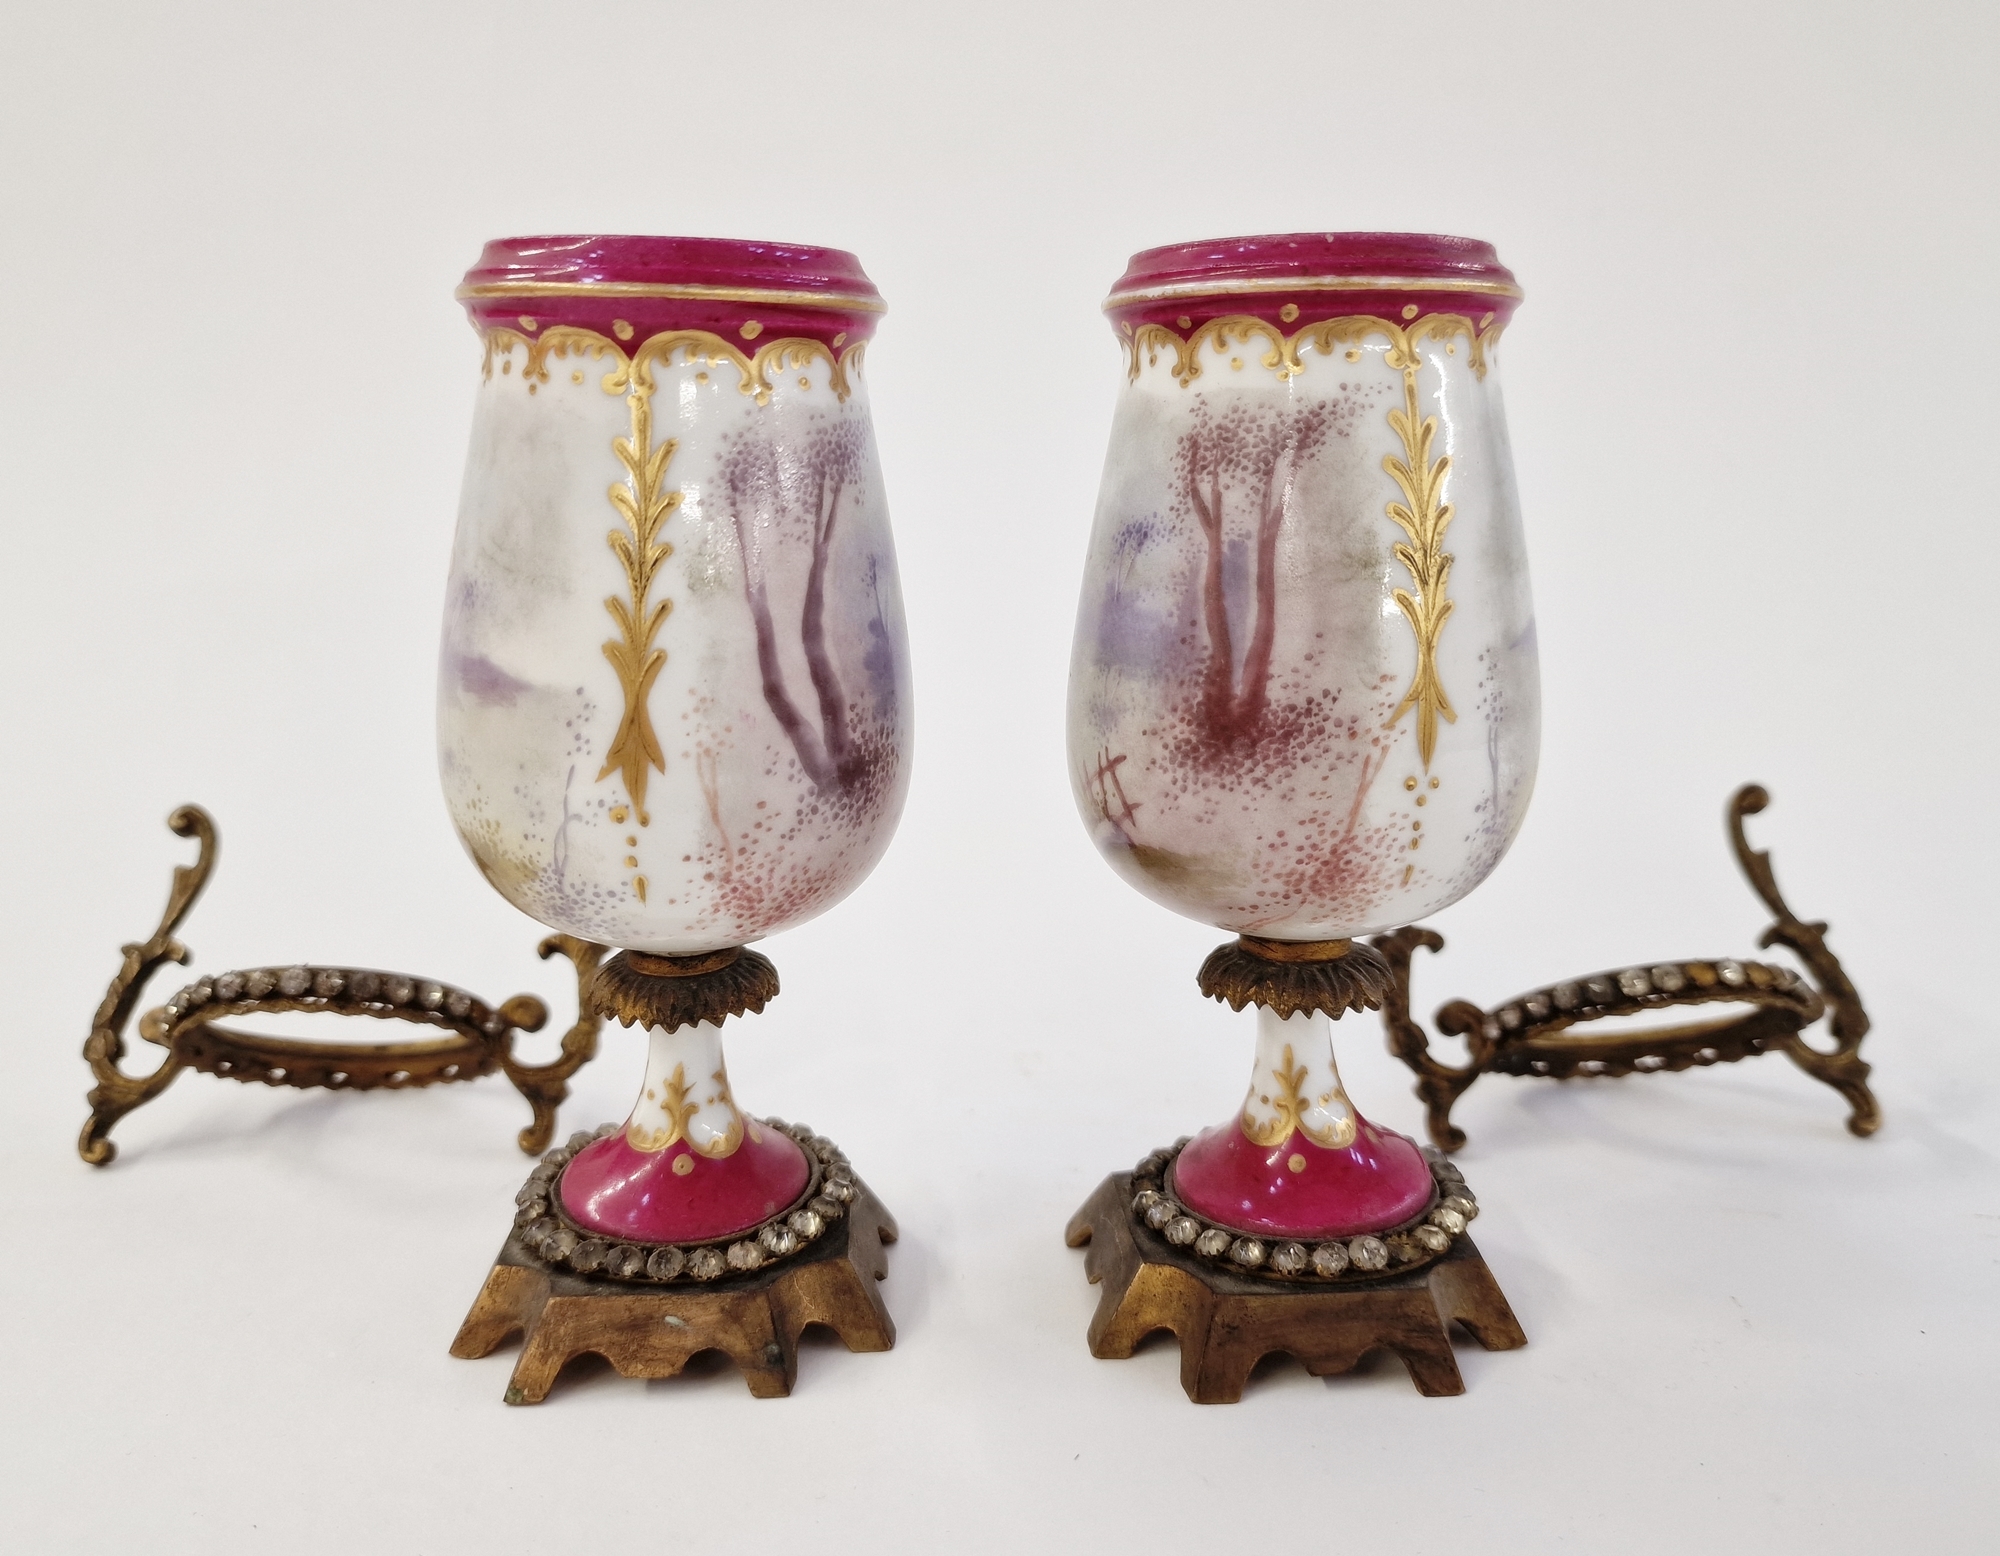 Pair of late 19th century gilt metal-mounted Sevres-style vases, spurious interlaced L marks, each - Image 2 of 4